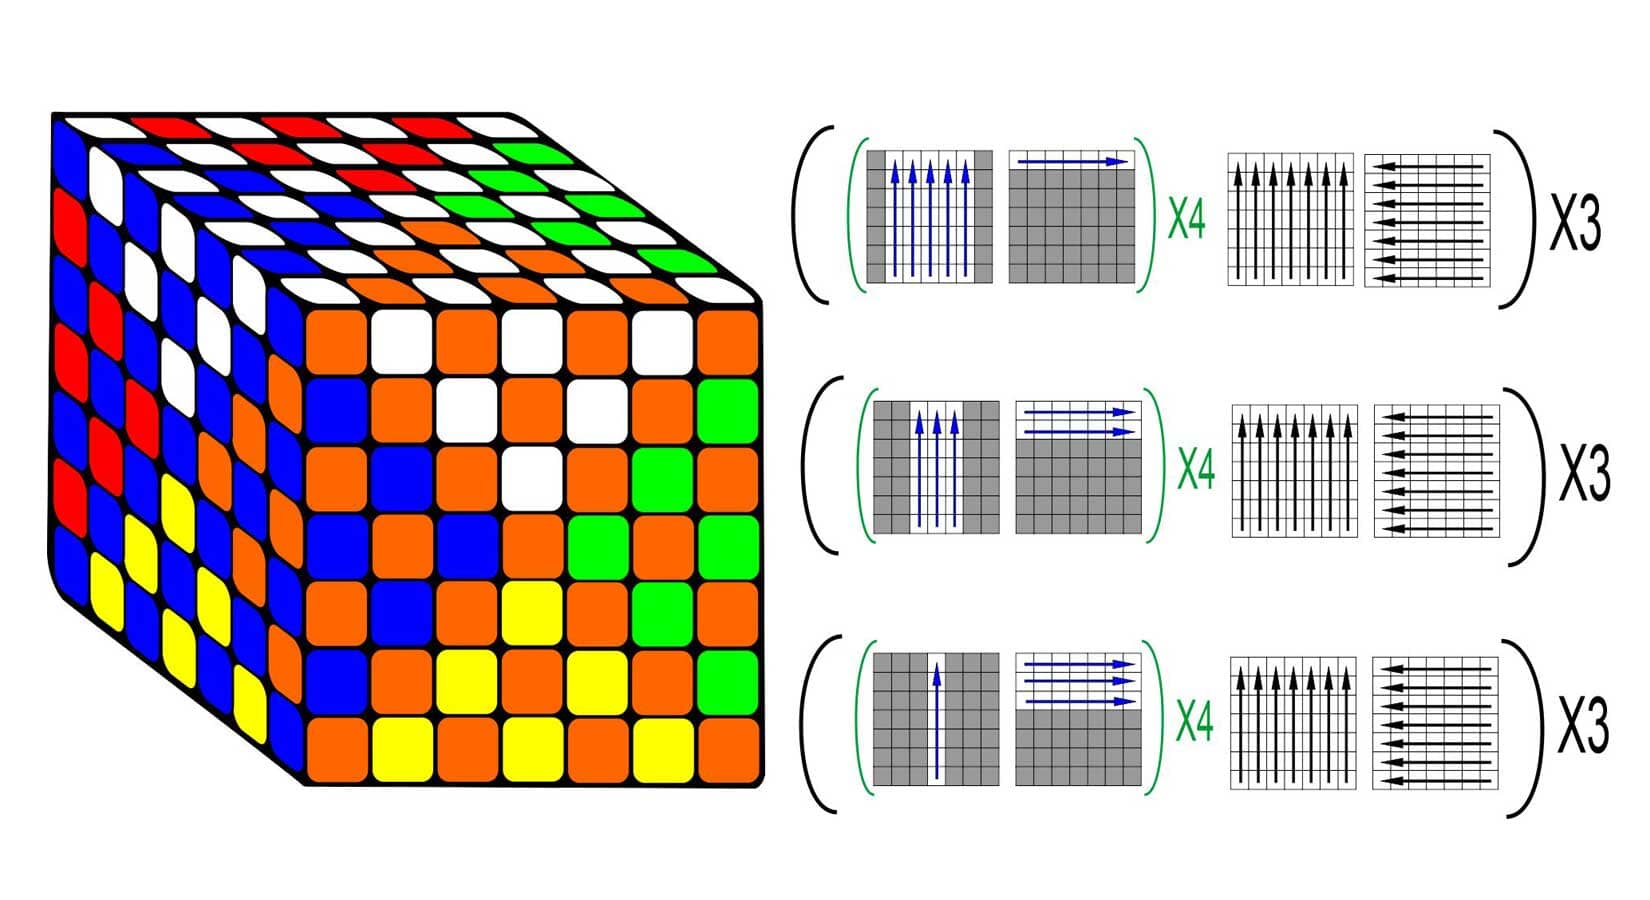 7 Rubik's Cube Algorithms to Solve Common Tricky Situations